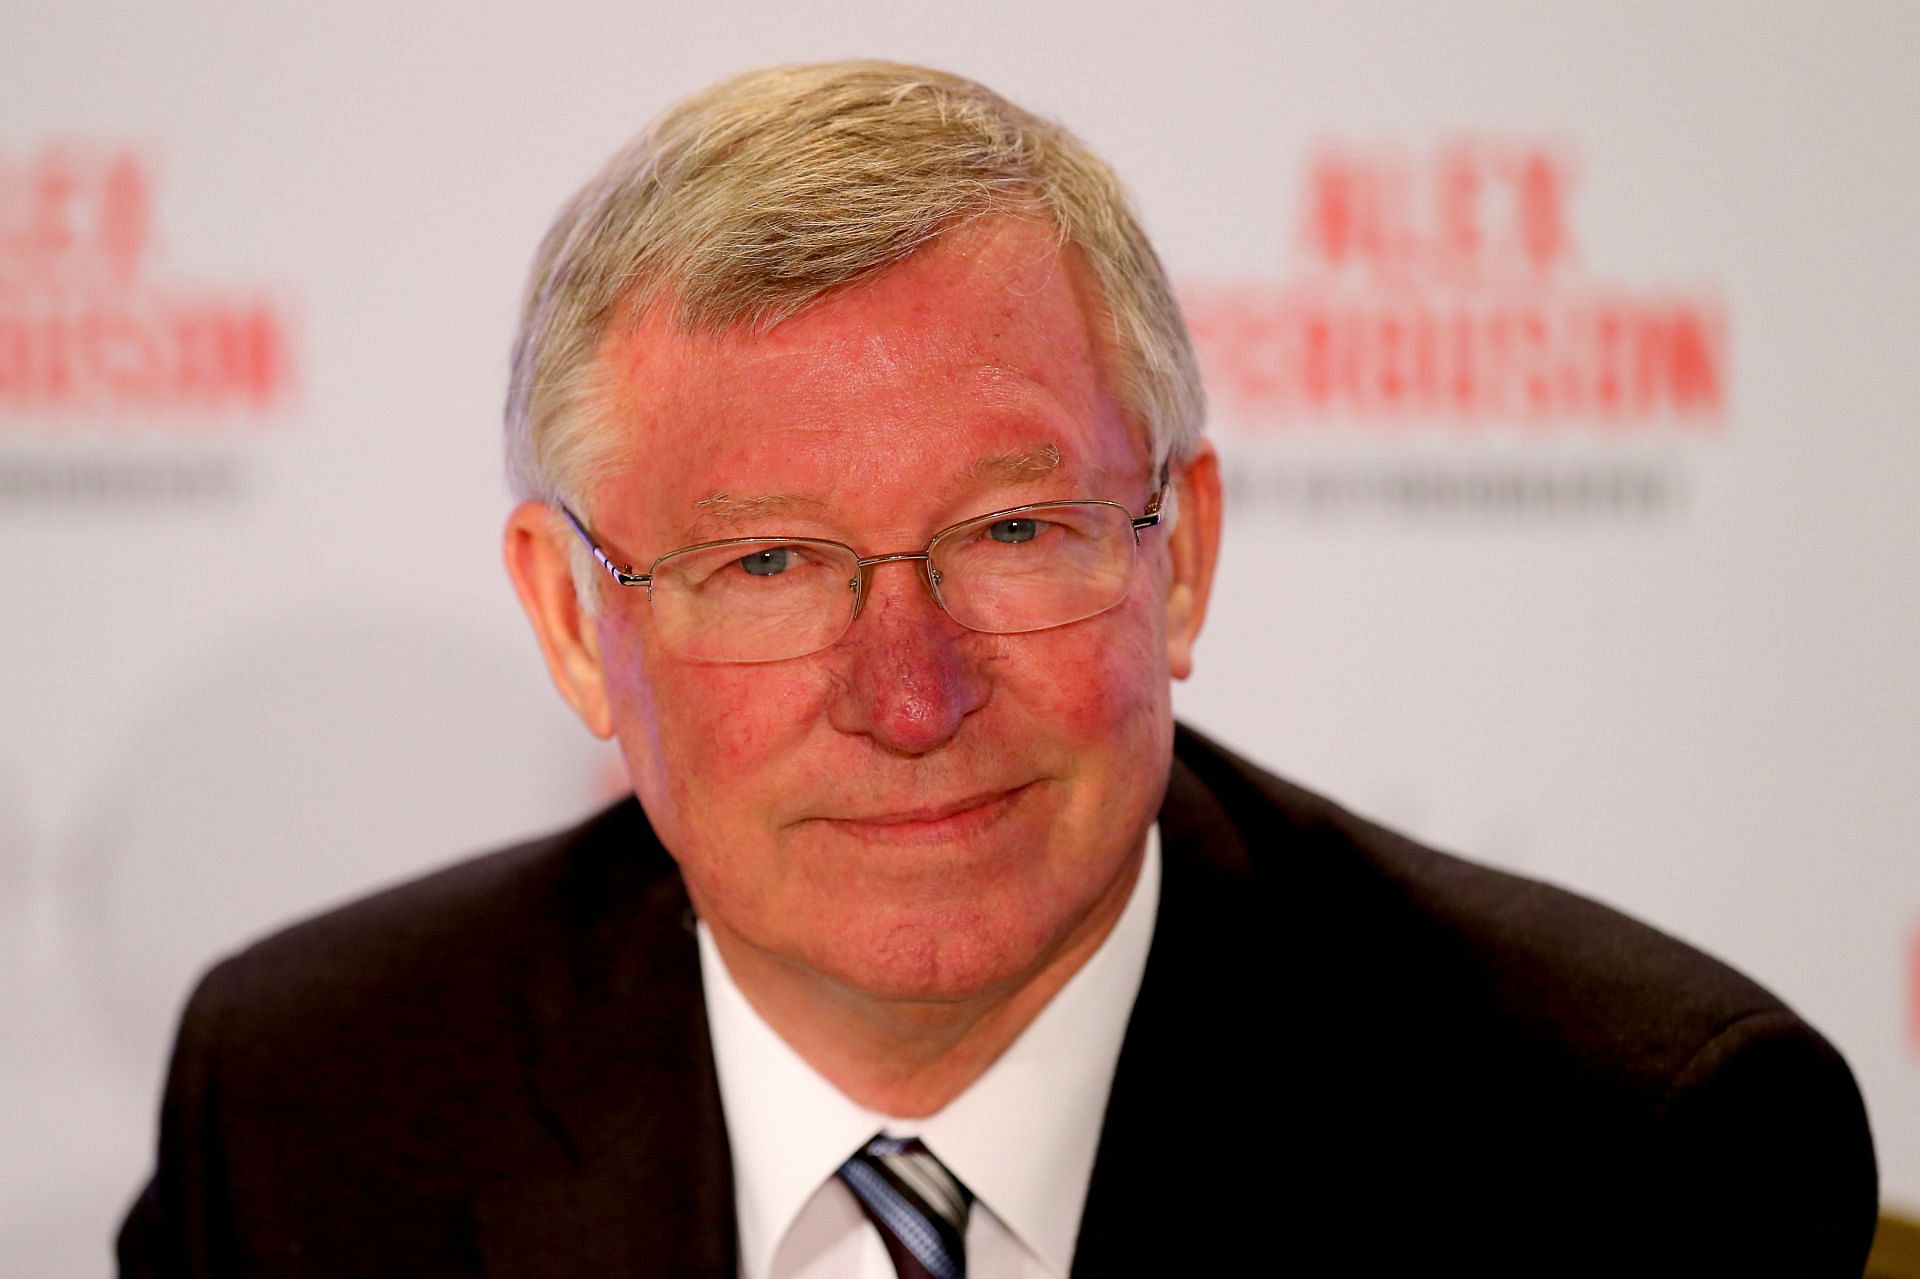 Sir Alex Ferguson has a case for the best manager football has ever seen.